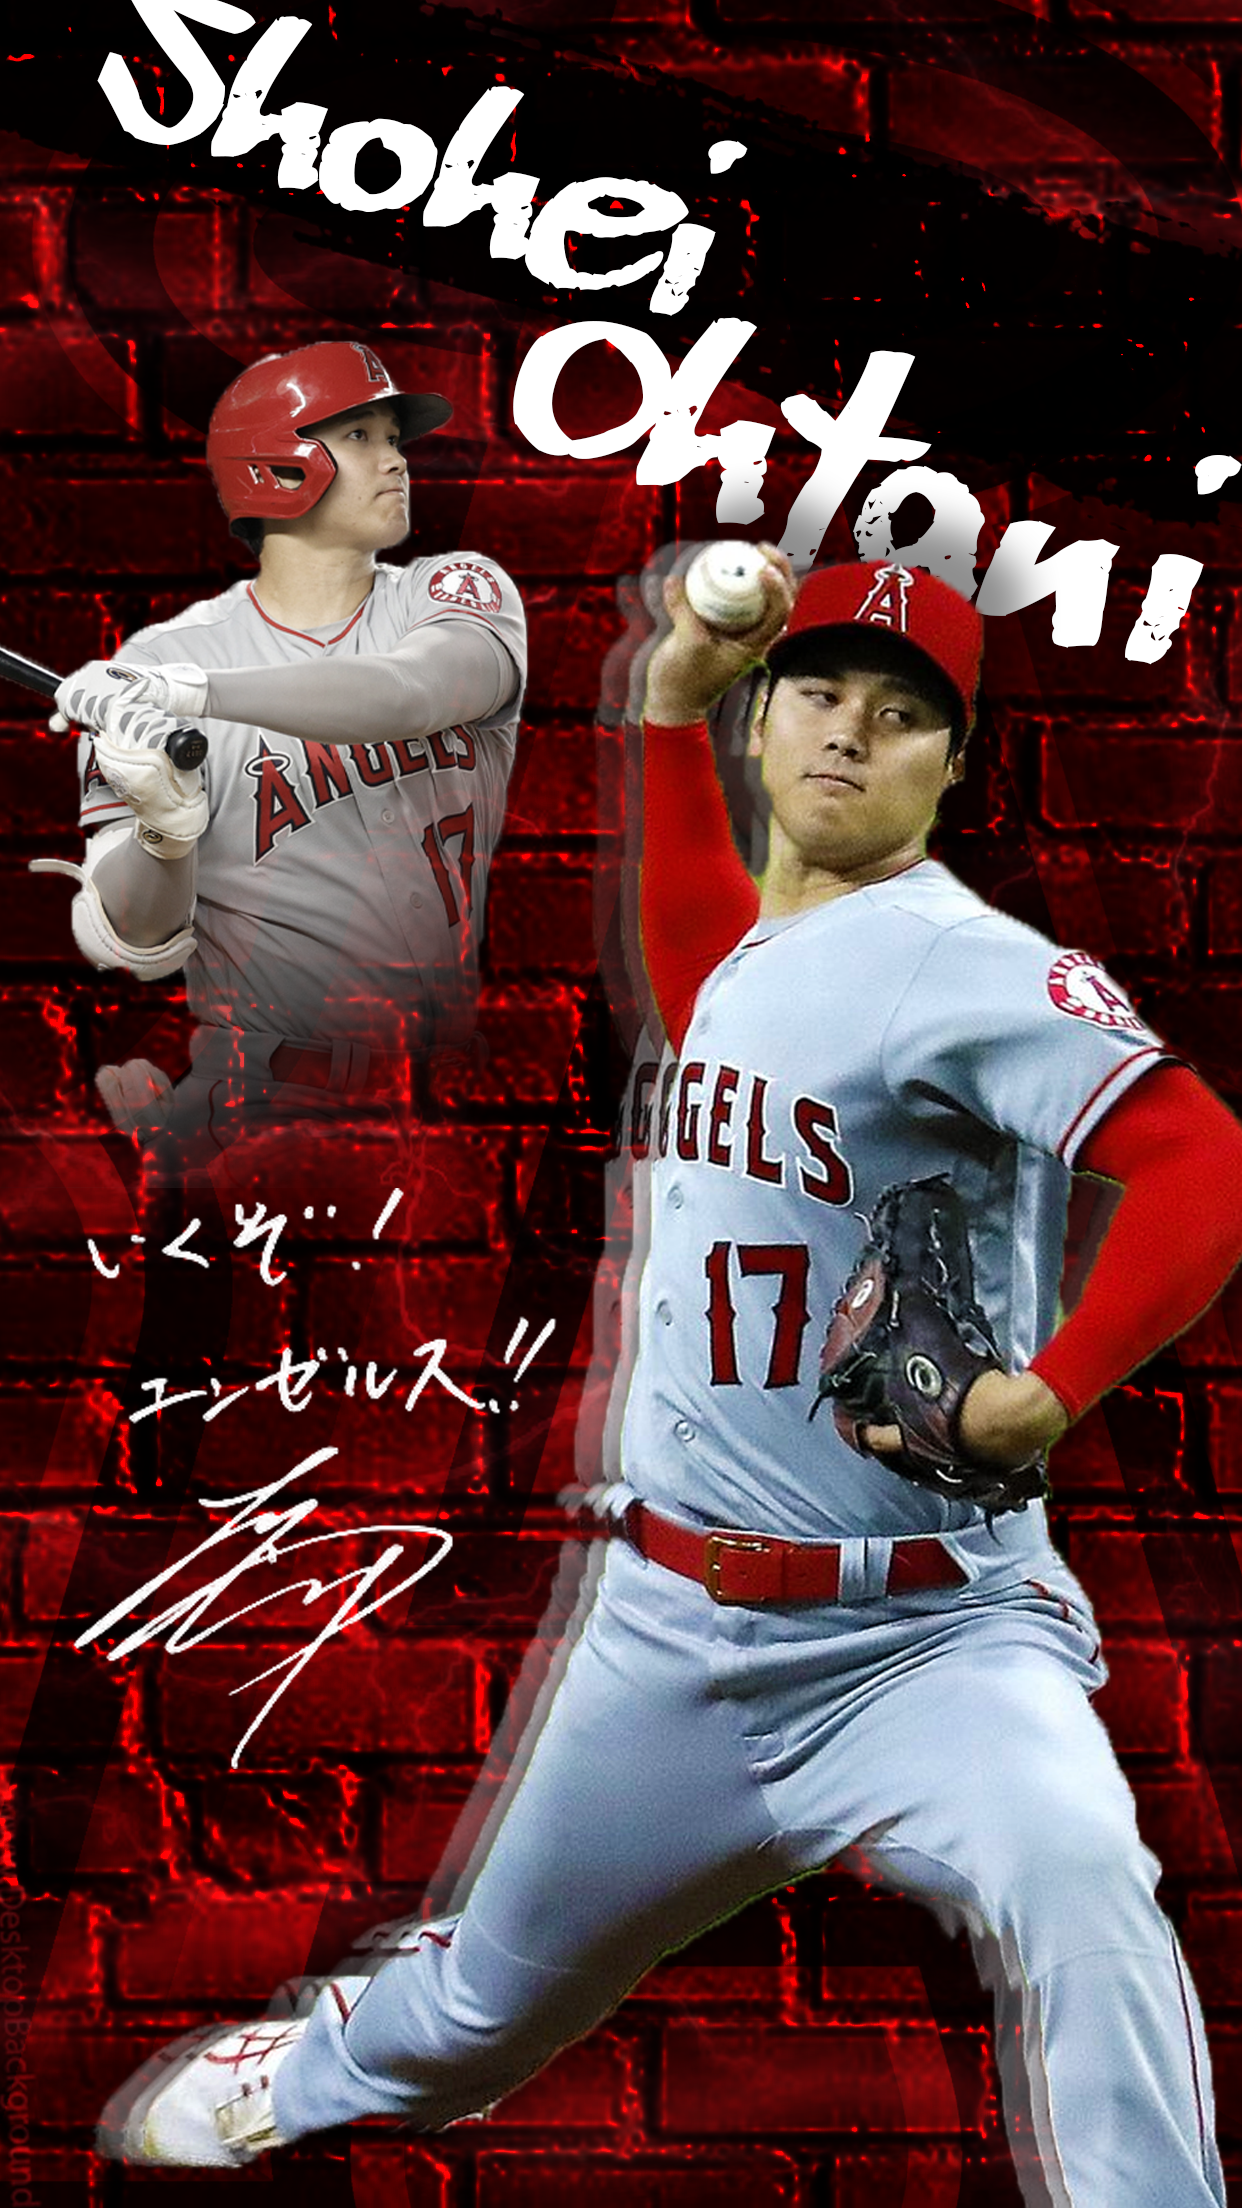 Baseball Shohei Ohtani 1for4 as Angels resume losing ways against Mets